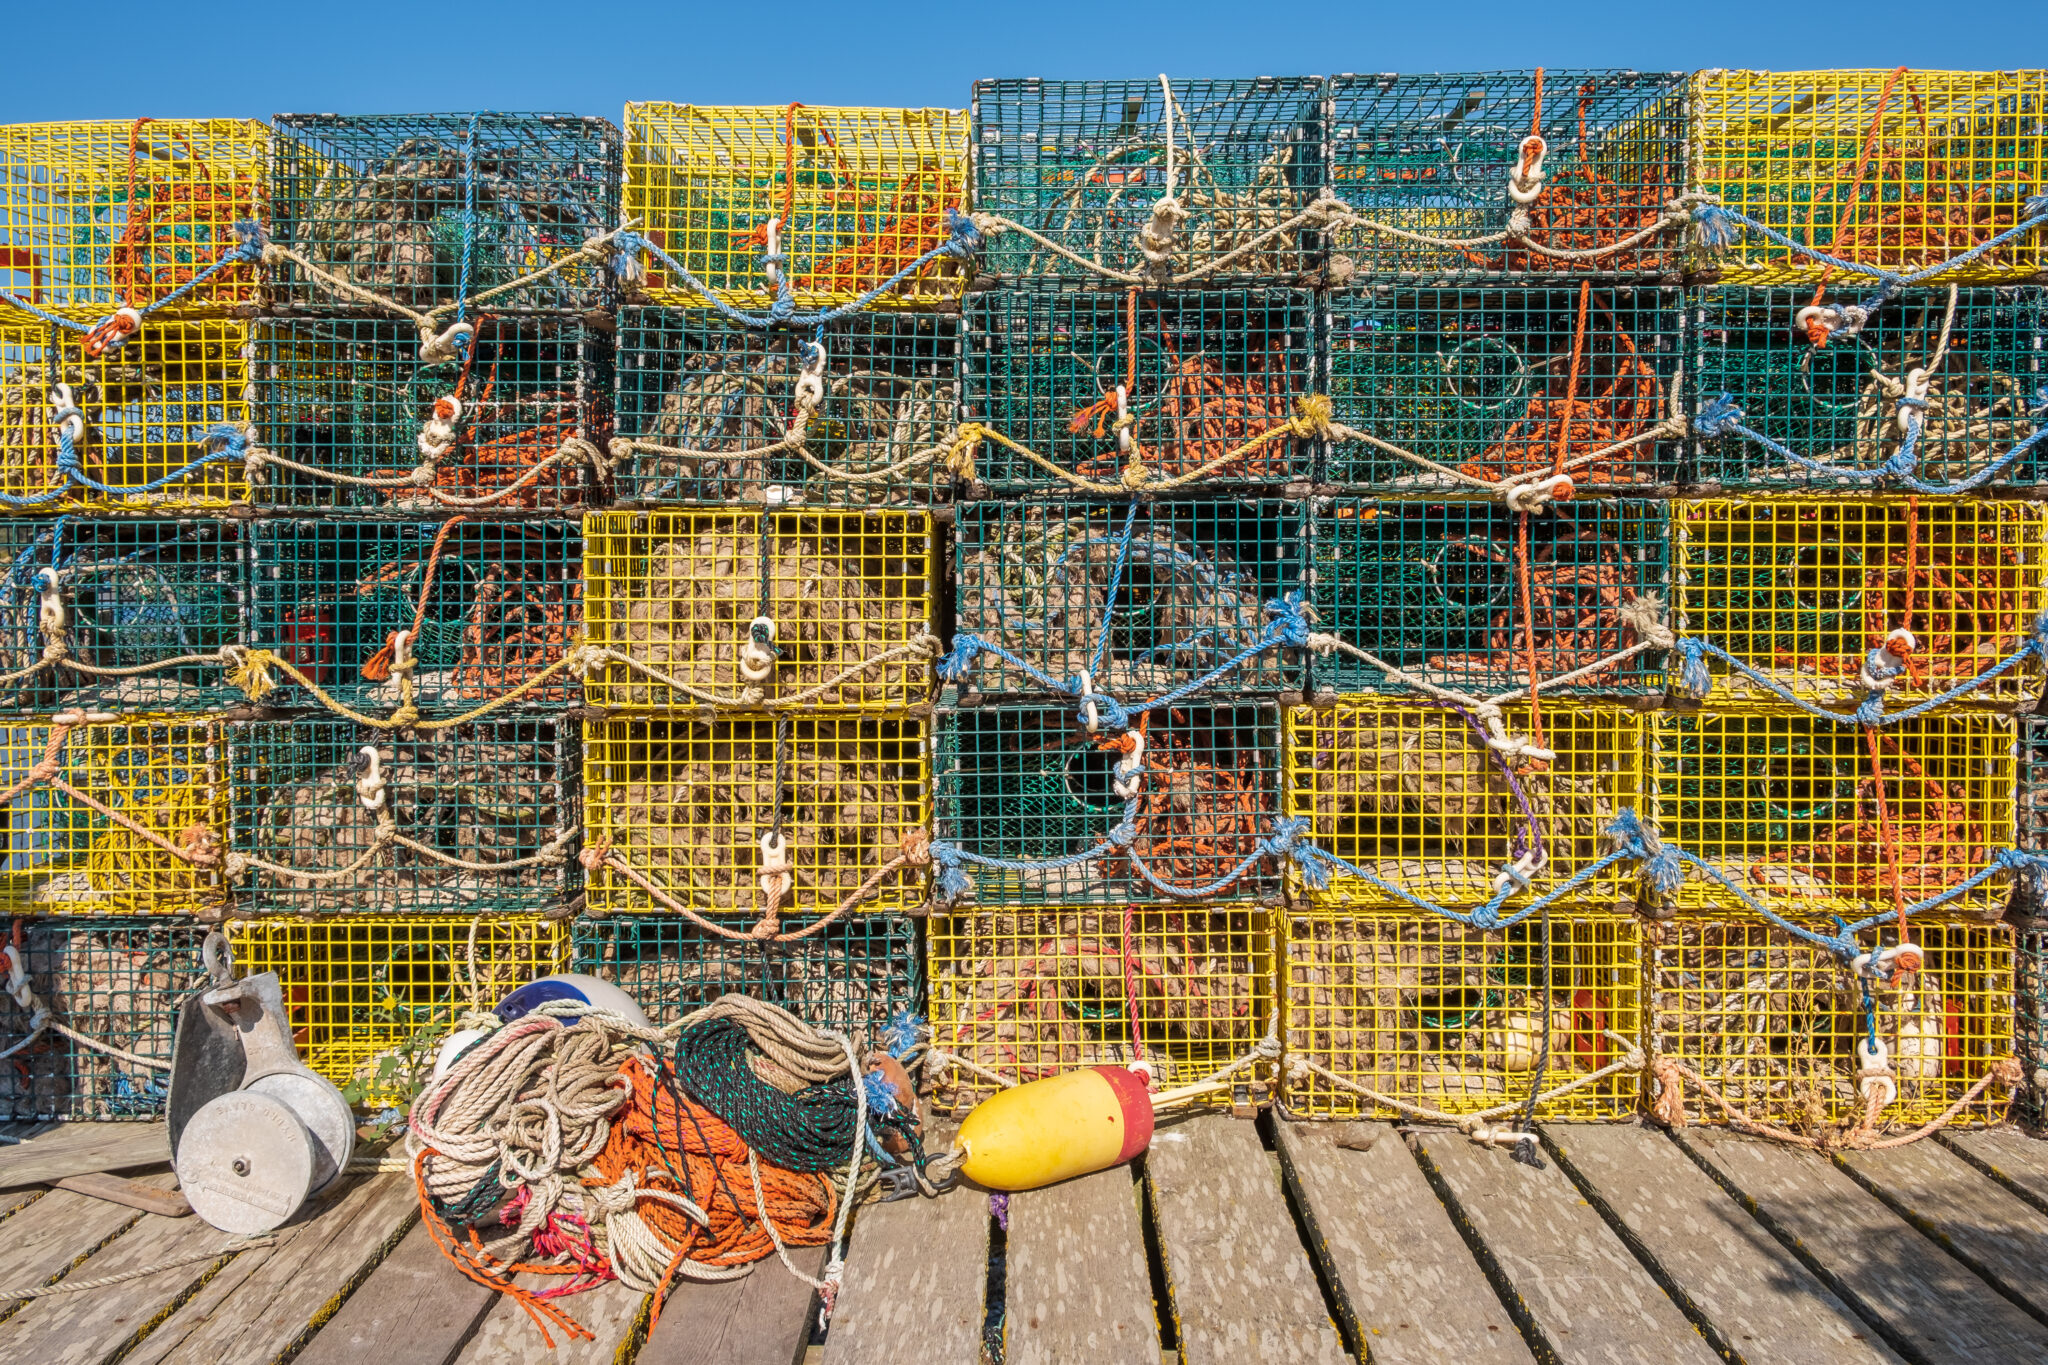 Seafood and Climate Change: What’s the Impact of Rising Ocean Temperatures?